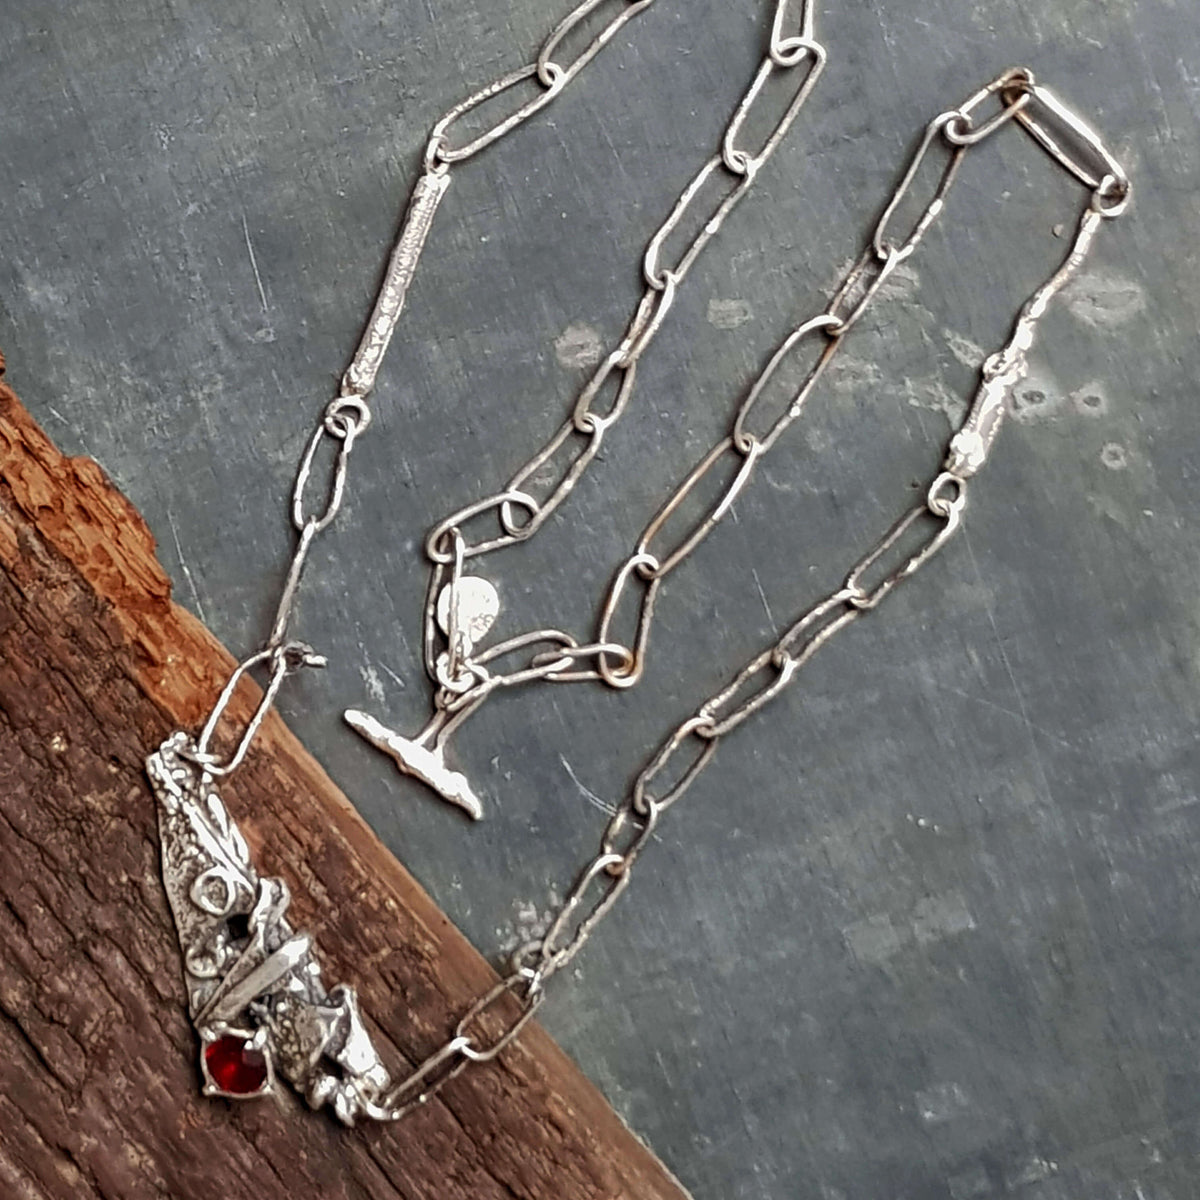 rustic looking long handmade necklace, hand made silver links, closes with a handmade silver toggle, featuring a rough textured silver pendant in a brutalist style with a red garnet gemstone